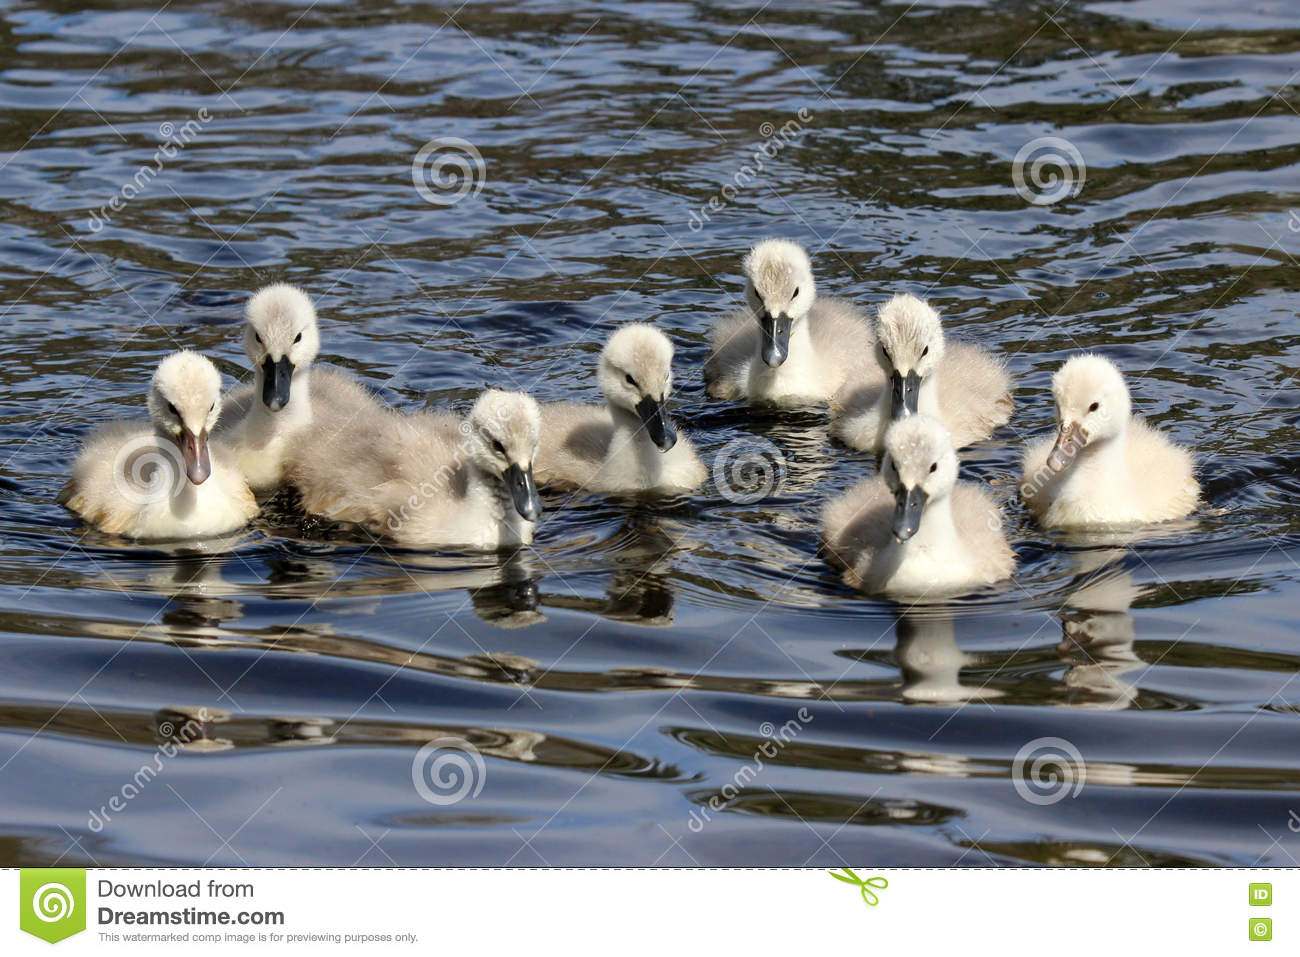 What is a group of baby swans?